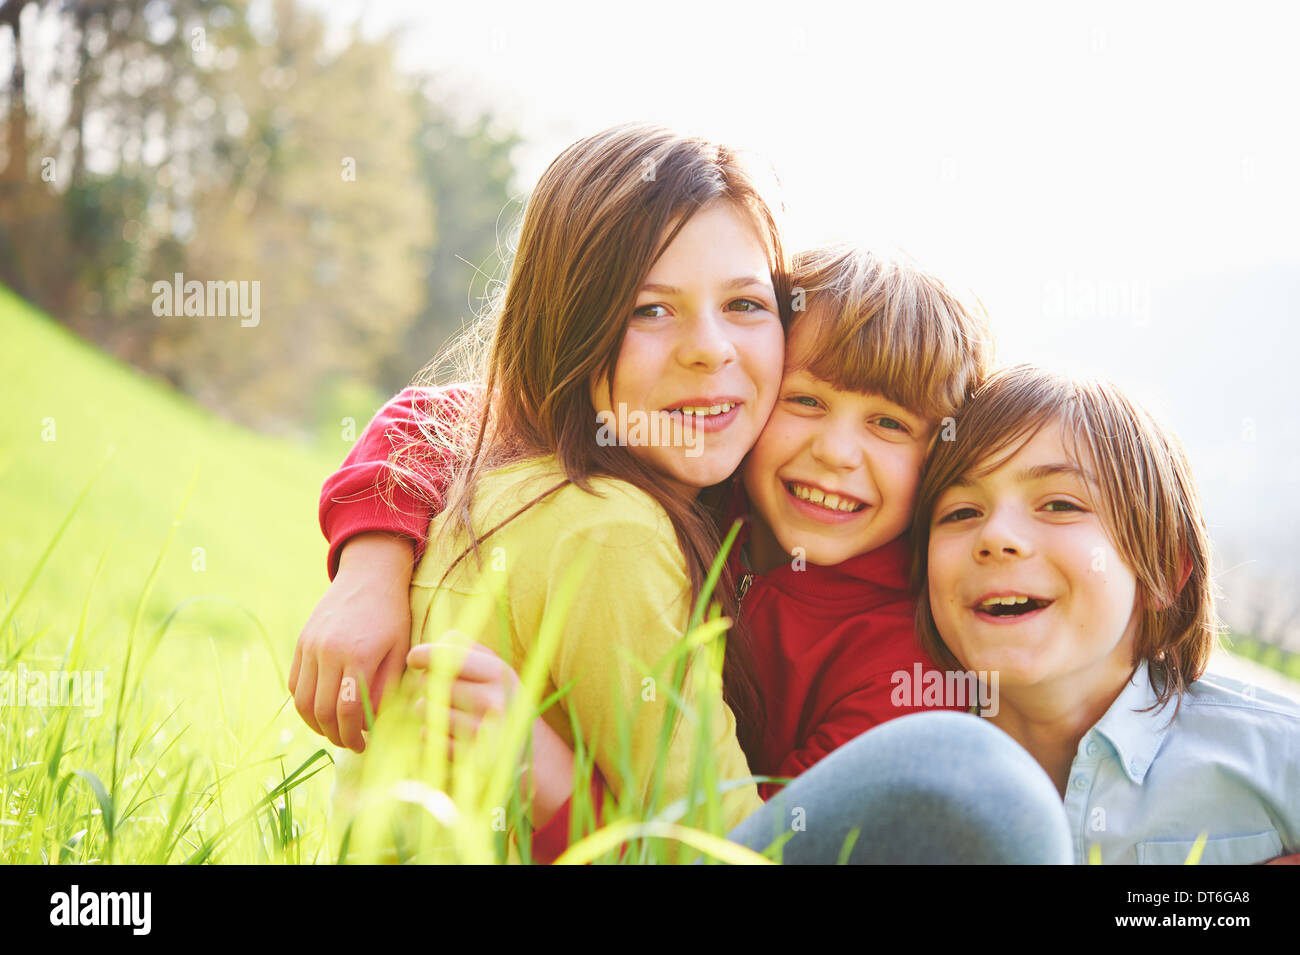 Sister and younger brothers sitting in grassy field Stock Photo